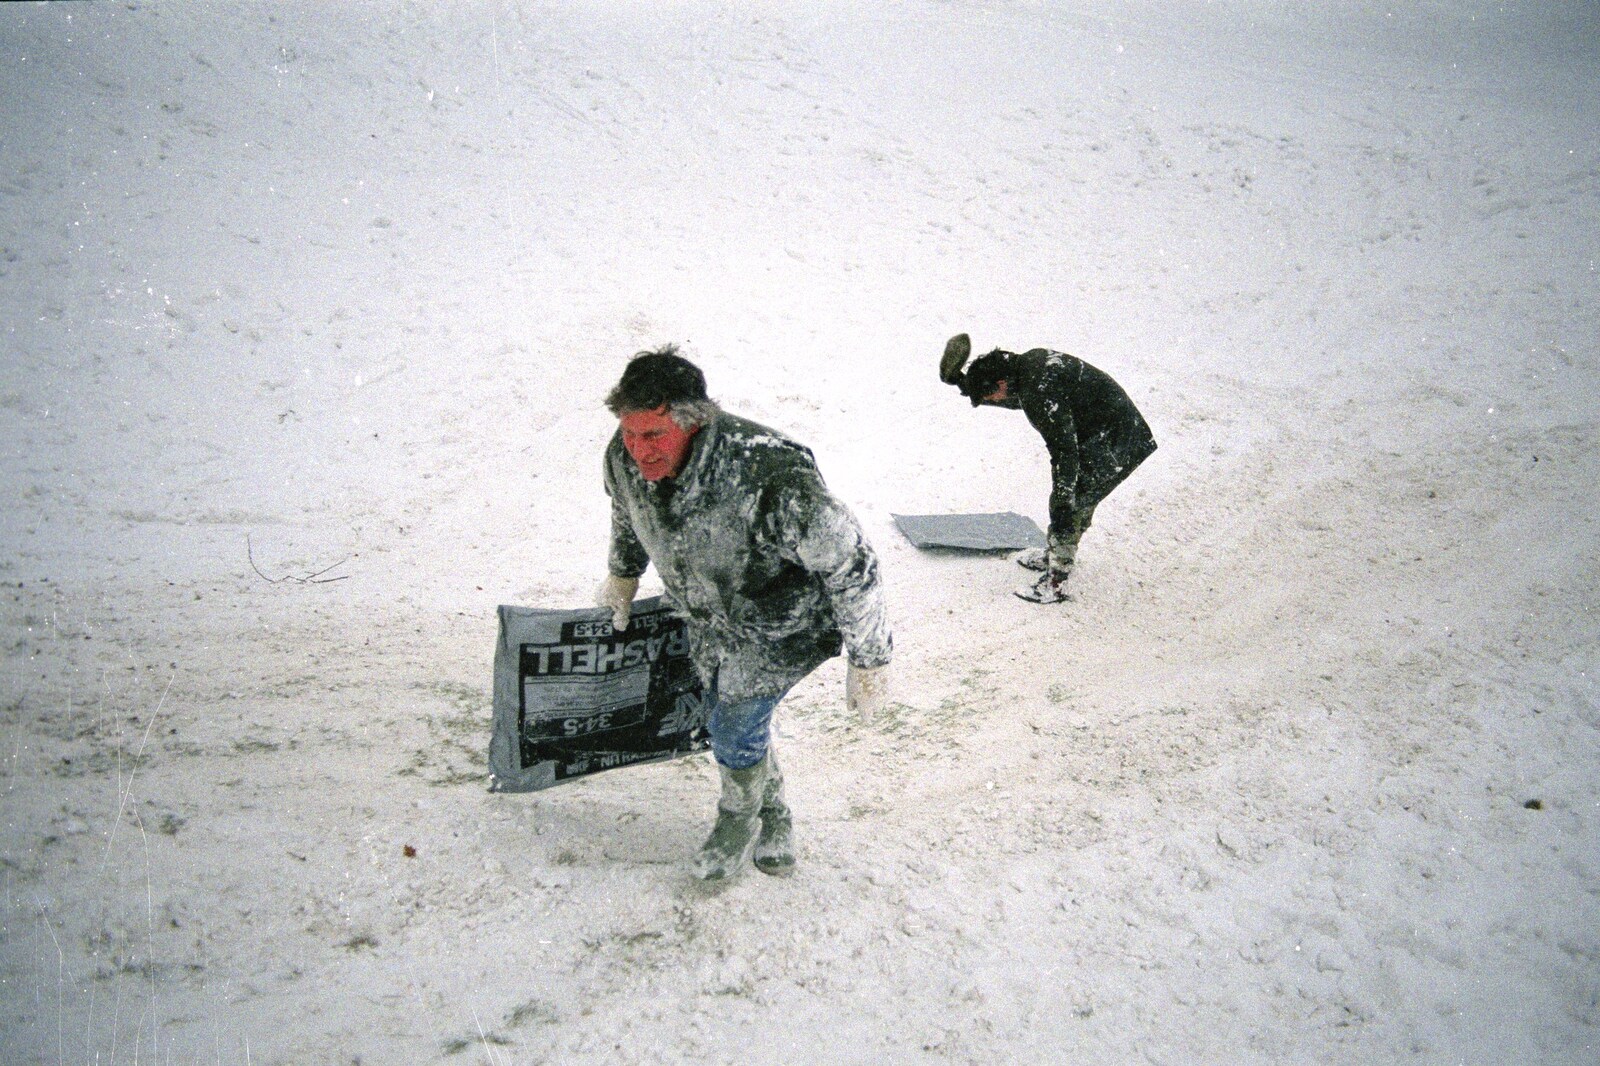 Geoff hauls his fertiliser bag up the hill from Sledging on the Common and Some Music, Stuston, Suffolk - 5th February 1991